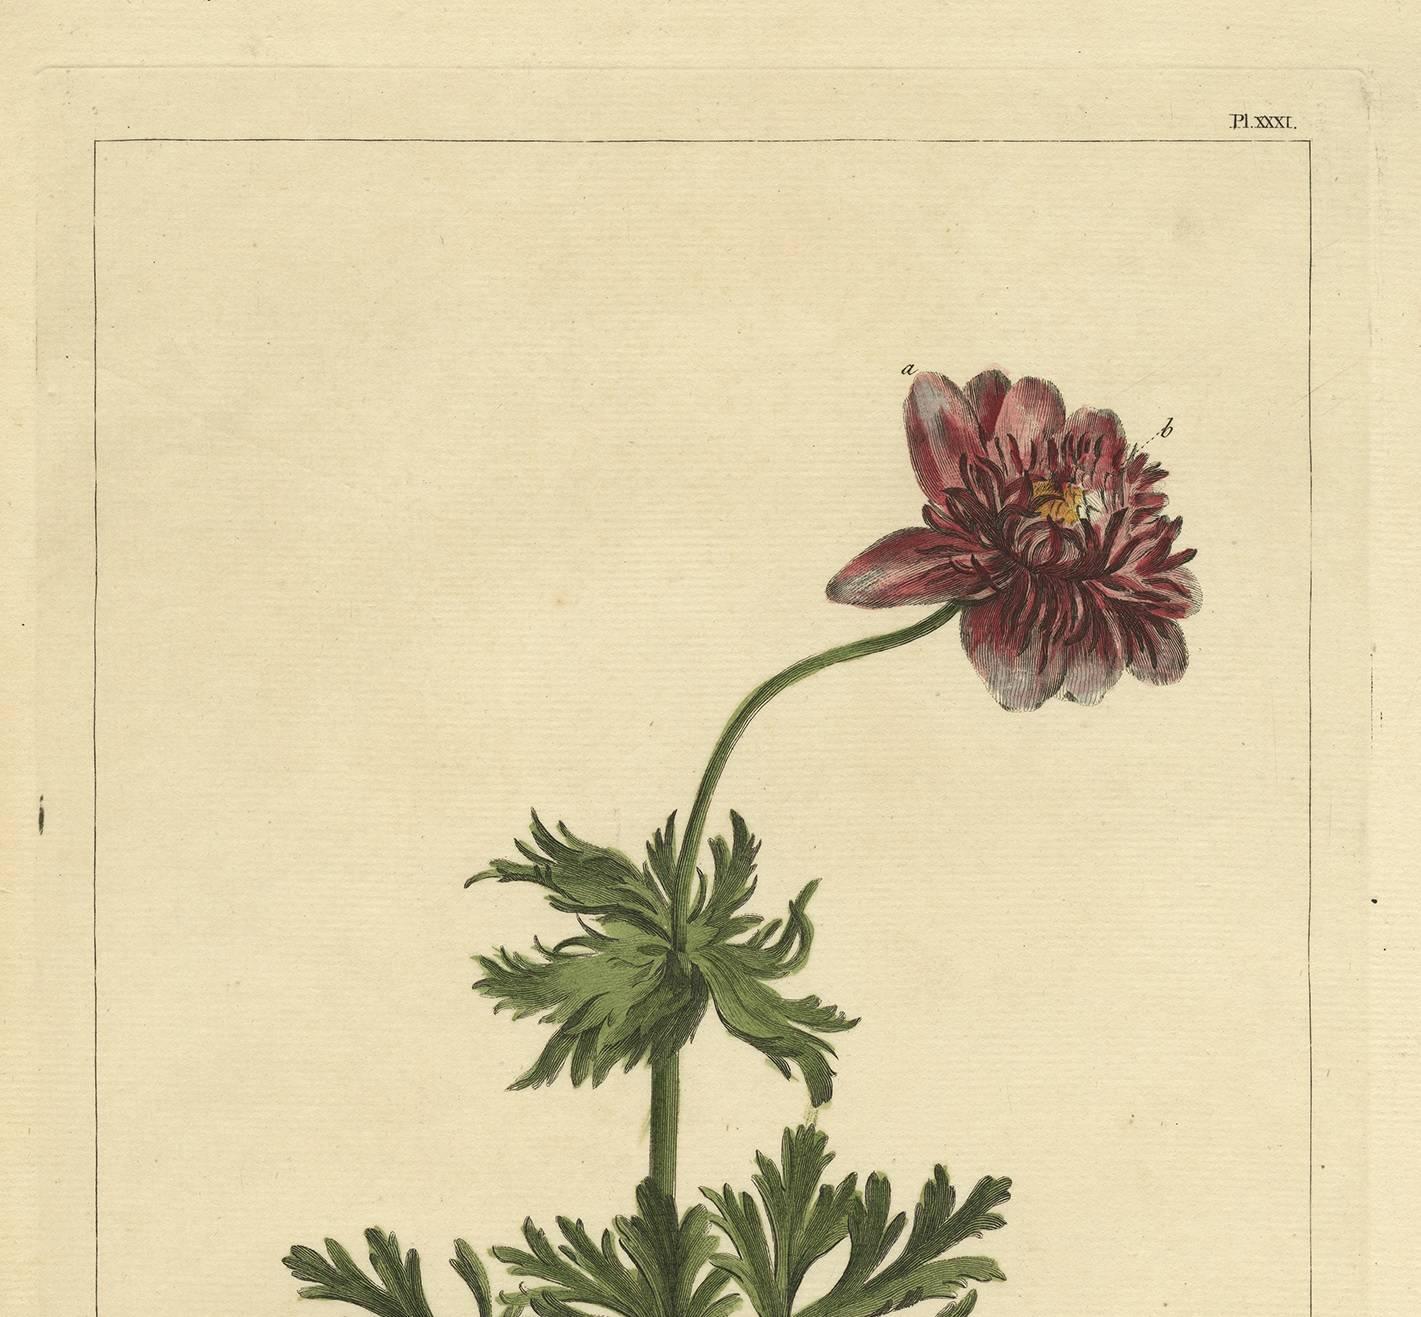 Plate XXXI 'Anemone', originates from 'Figures of the most beautiful, useful and uncommon plants described in the gardener's dictionary (..)' by P. Miller. 

Philip Miller was the principal horticulturalist in England in the mid-18th century.  As